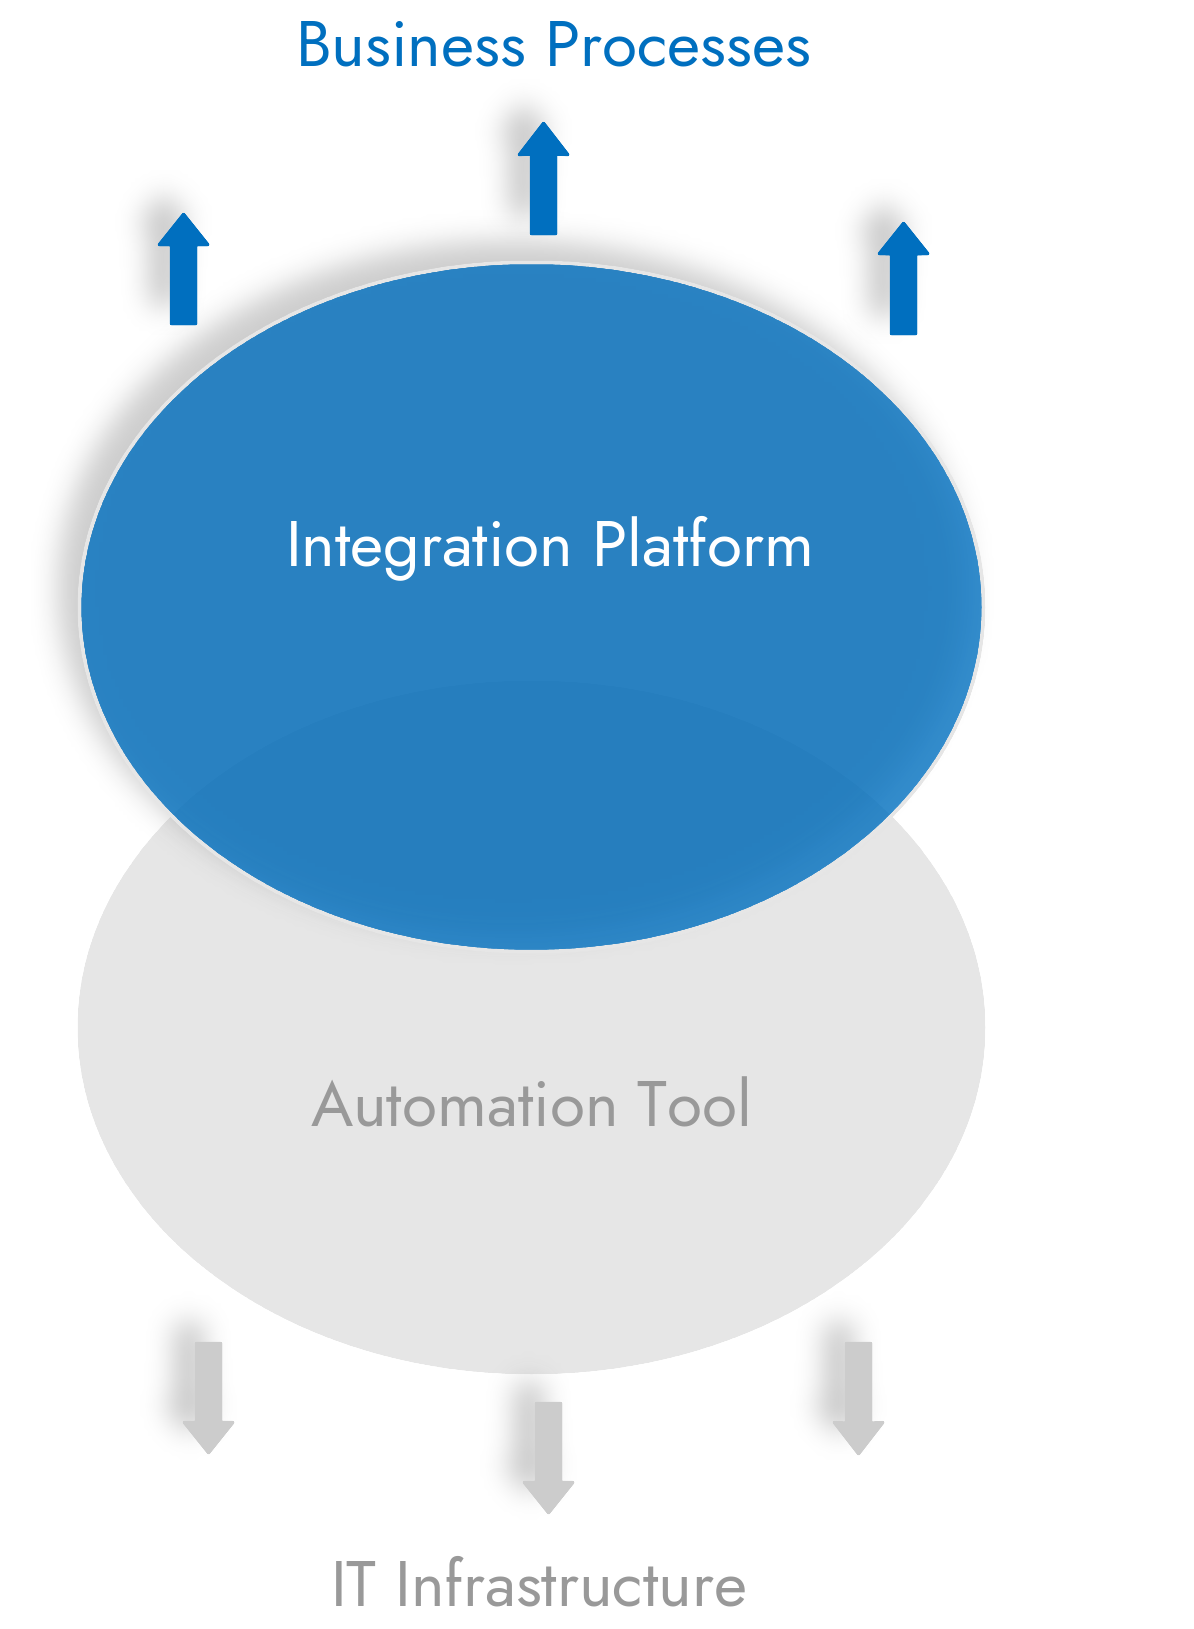 Comparing an integration platform with an automation tool